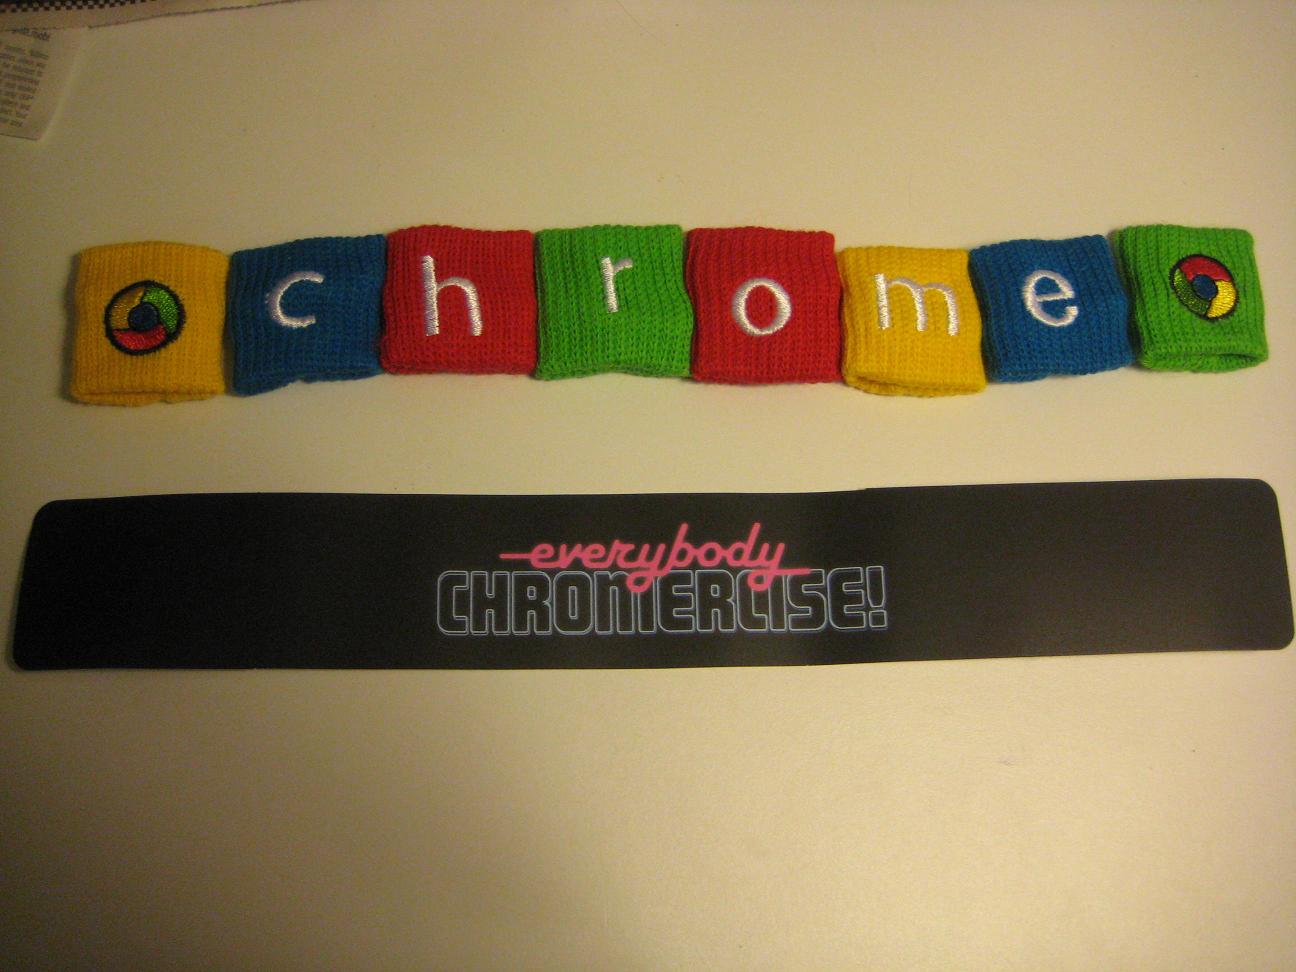 The bands with the Chromercise logo.